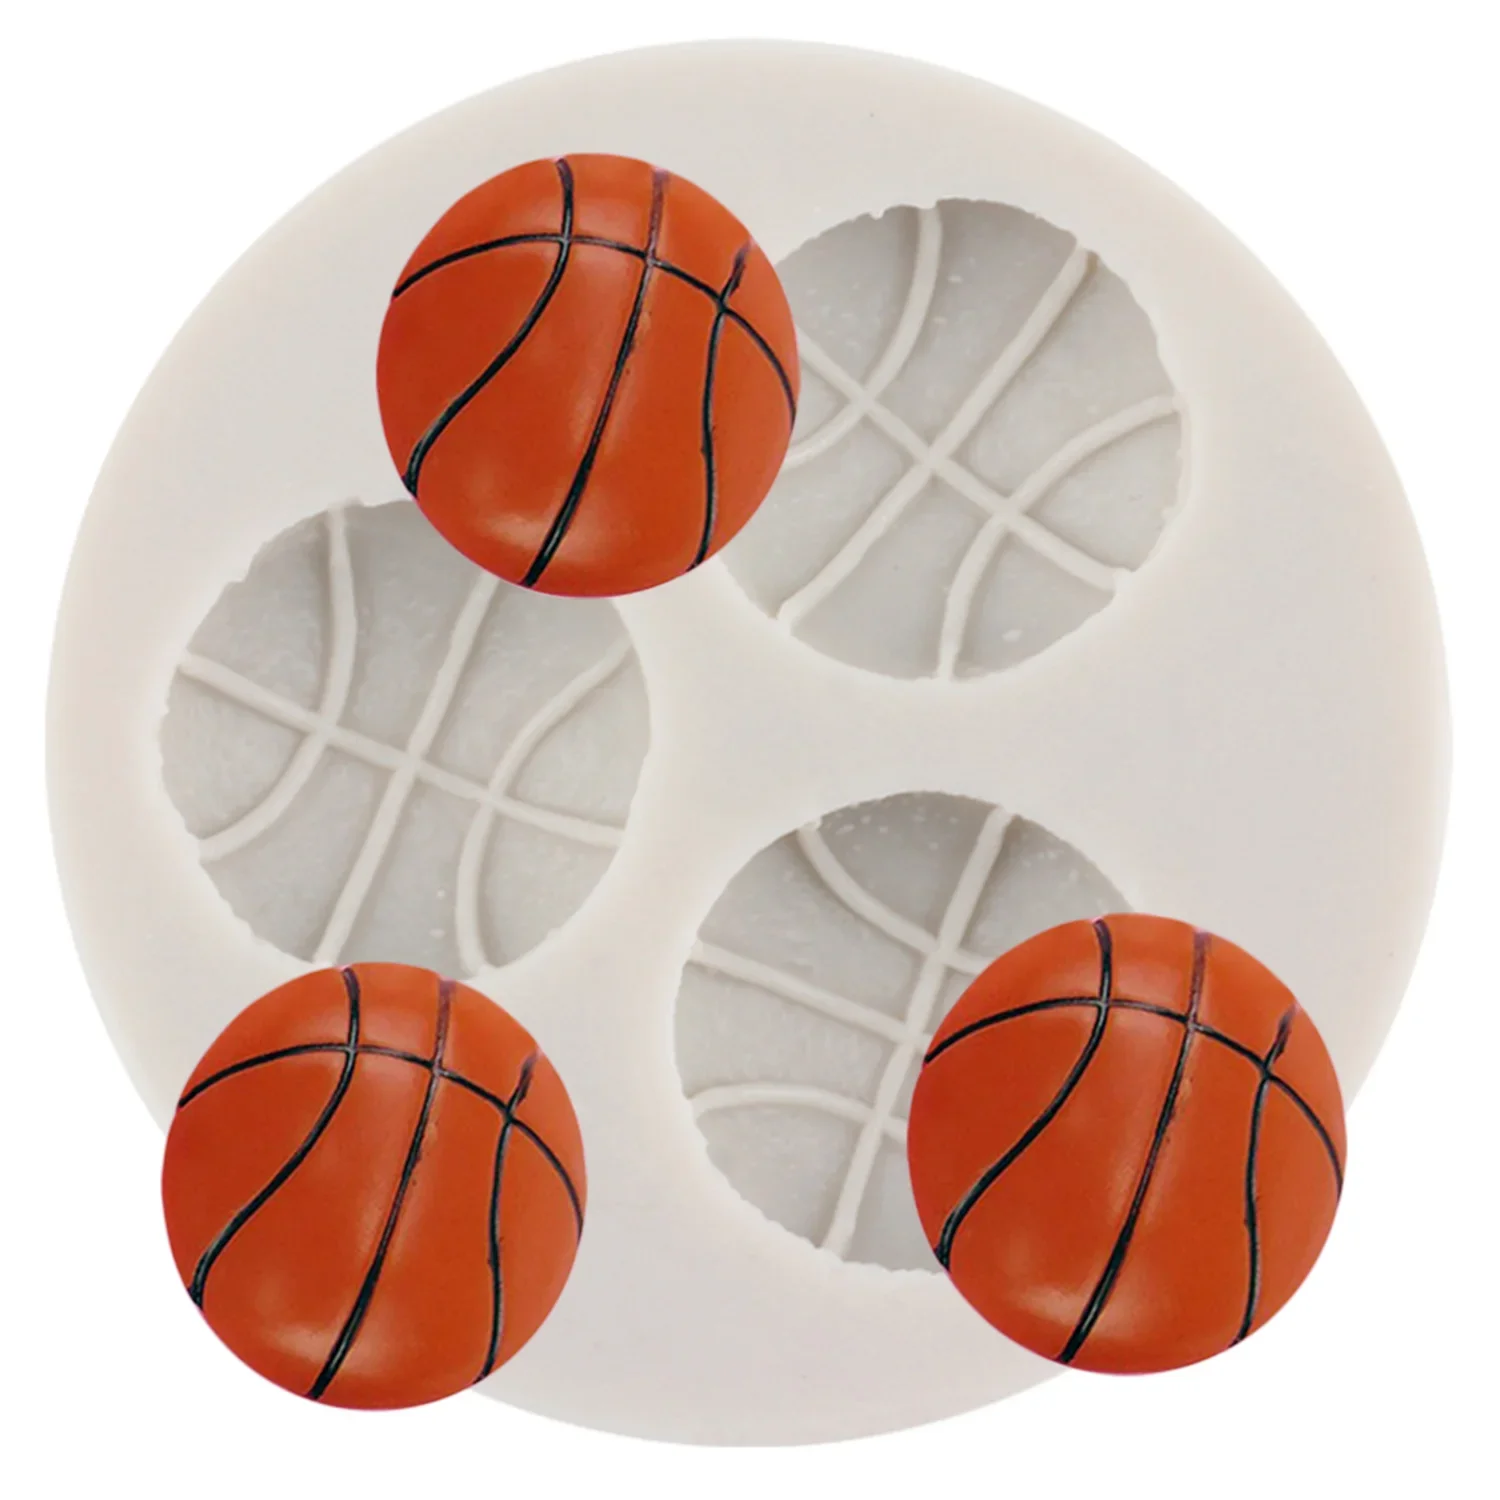 

Basketball Silicone Mold Sugarcraft Fondant Cake Decorating Tools Chocolate Gumpaste Moulds Polymer Clay Molds Candy Mould